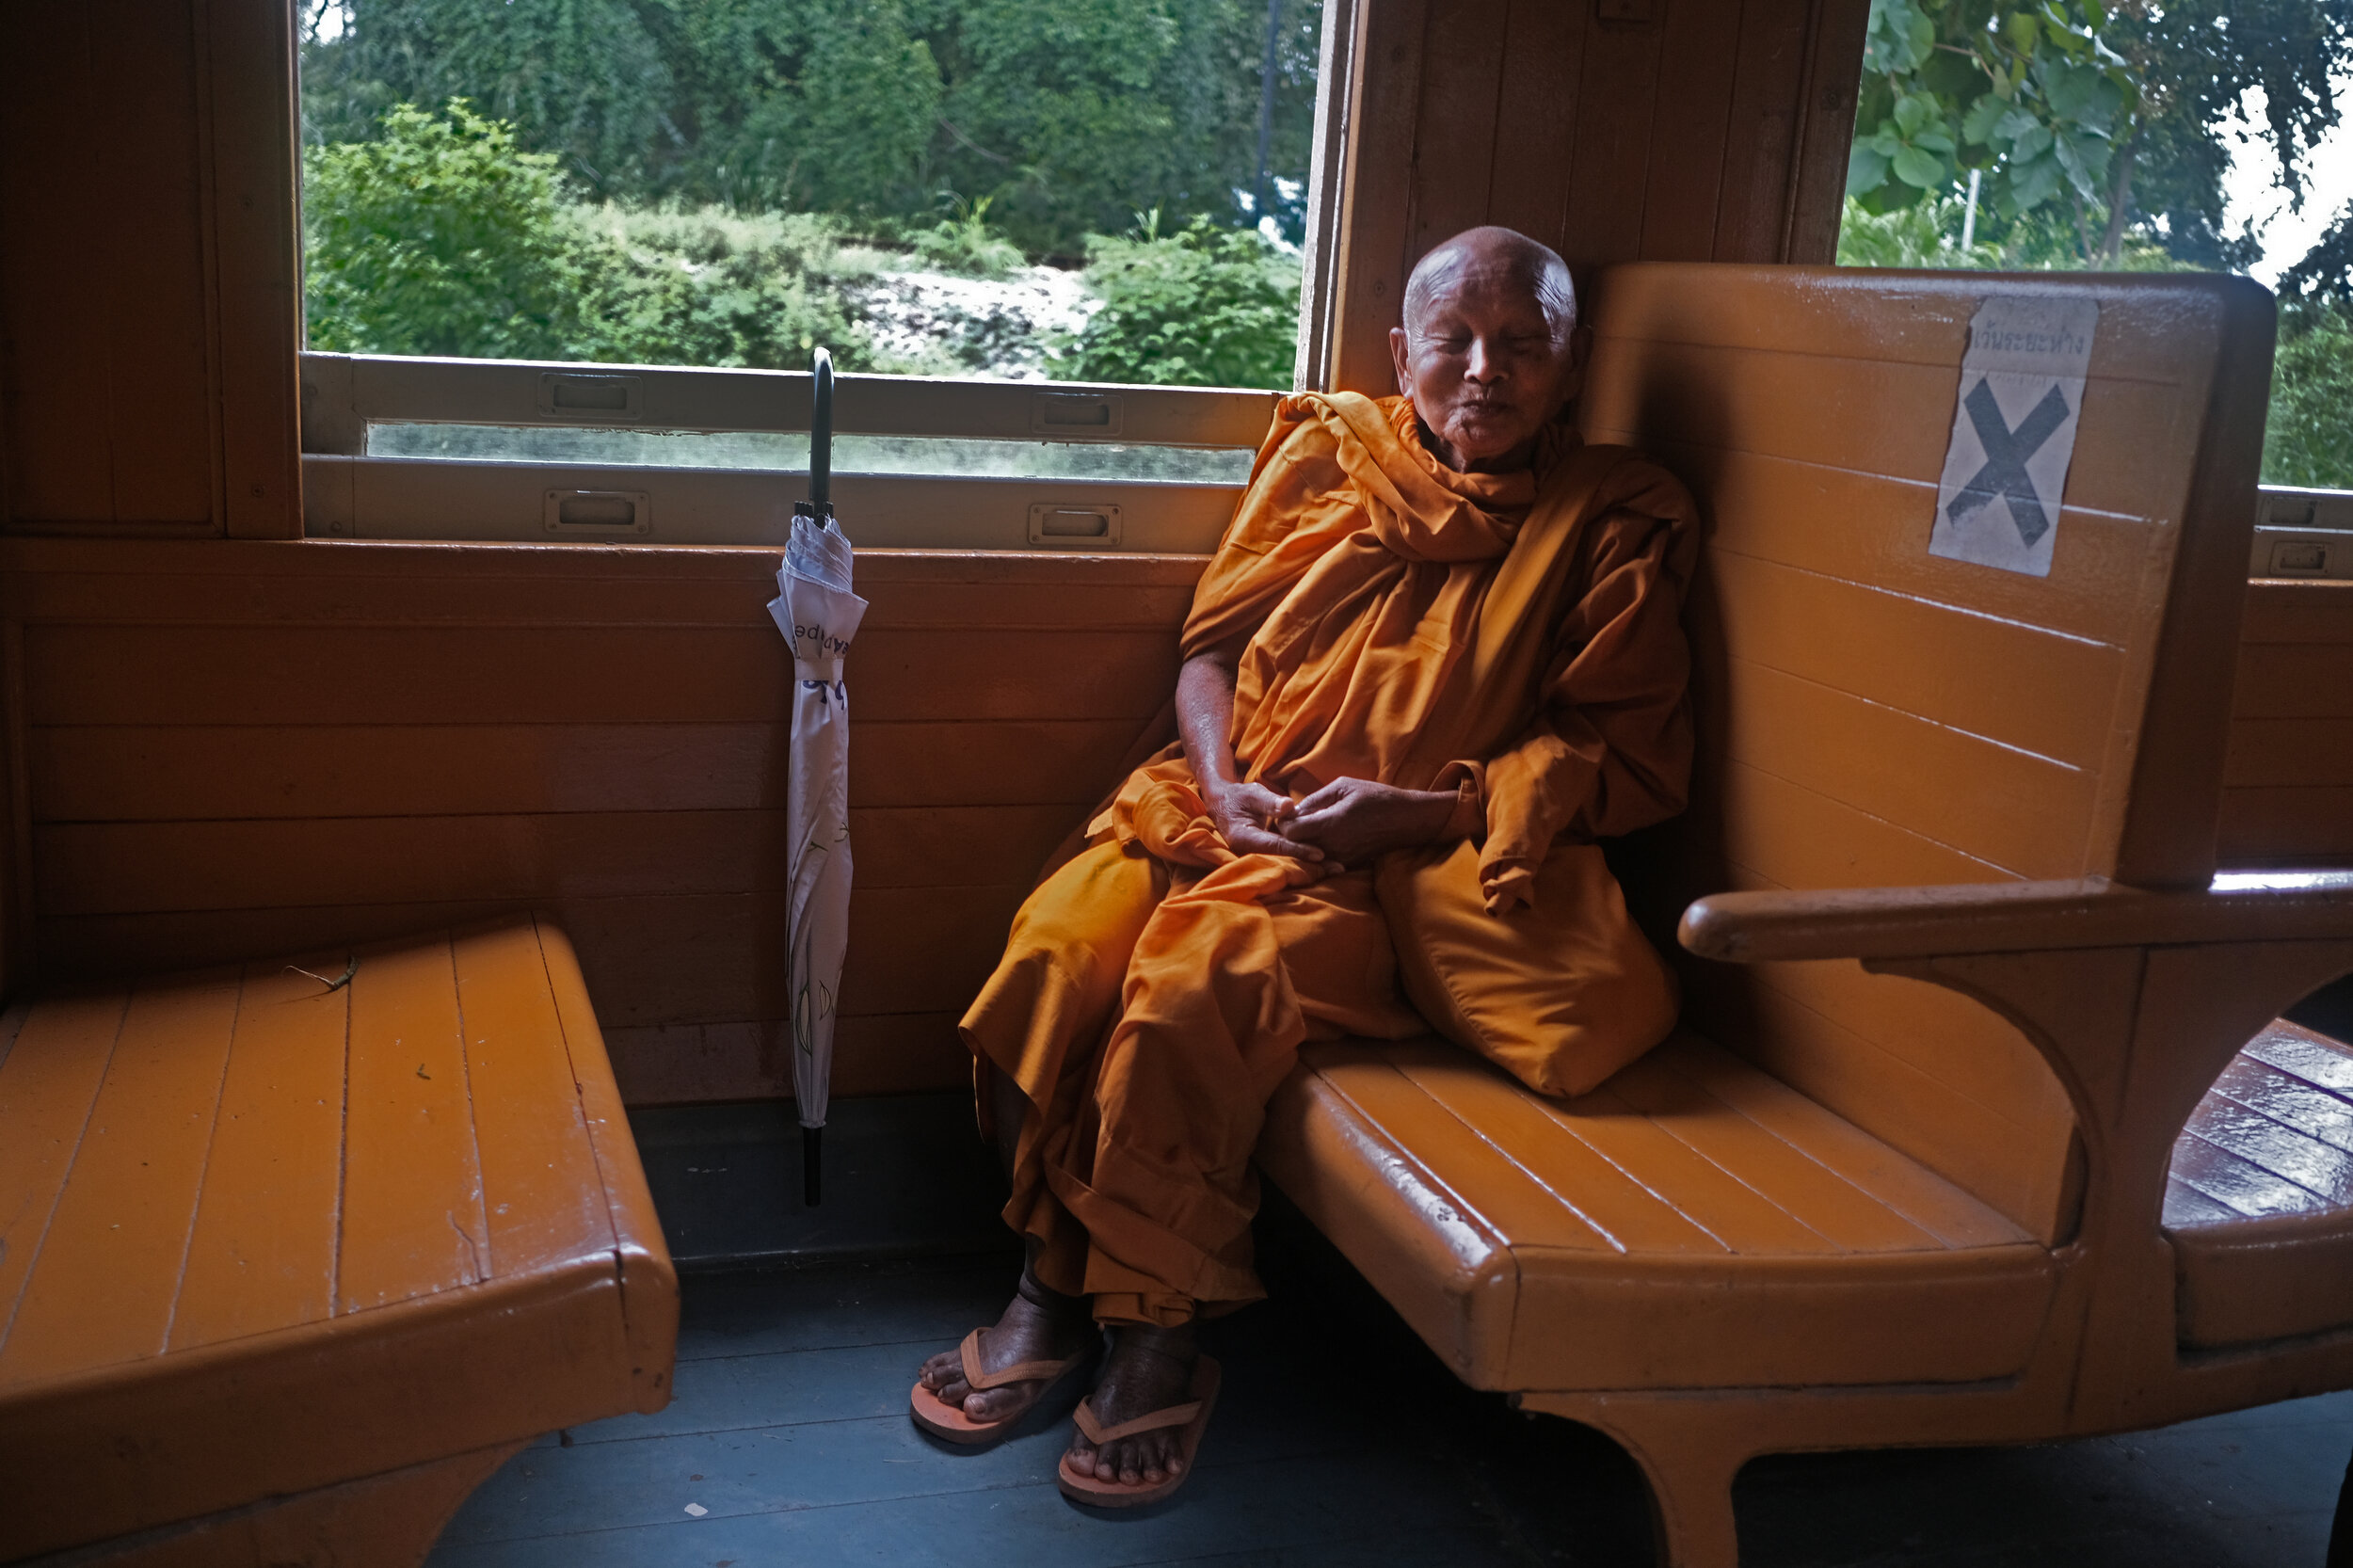  A Buddhist Monk en route to Kanchanaburi; we chatted, laughed, shared some food and stared out the window.      